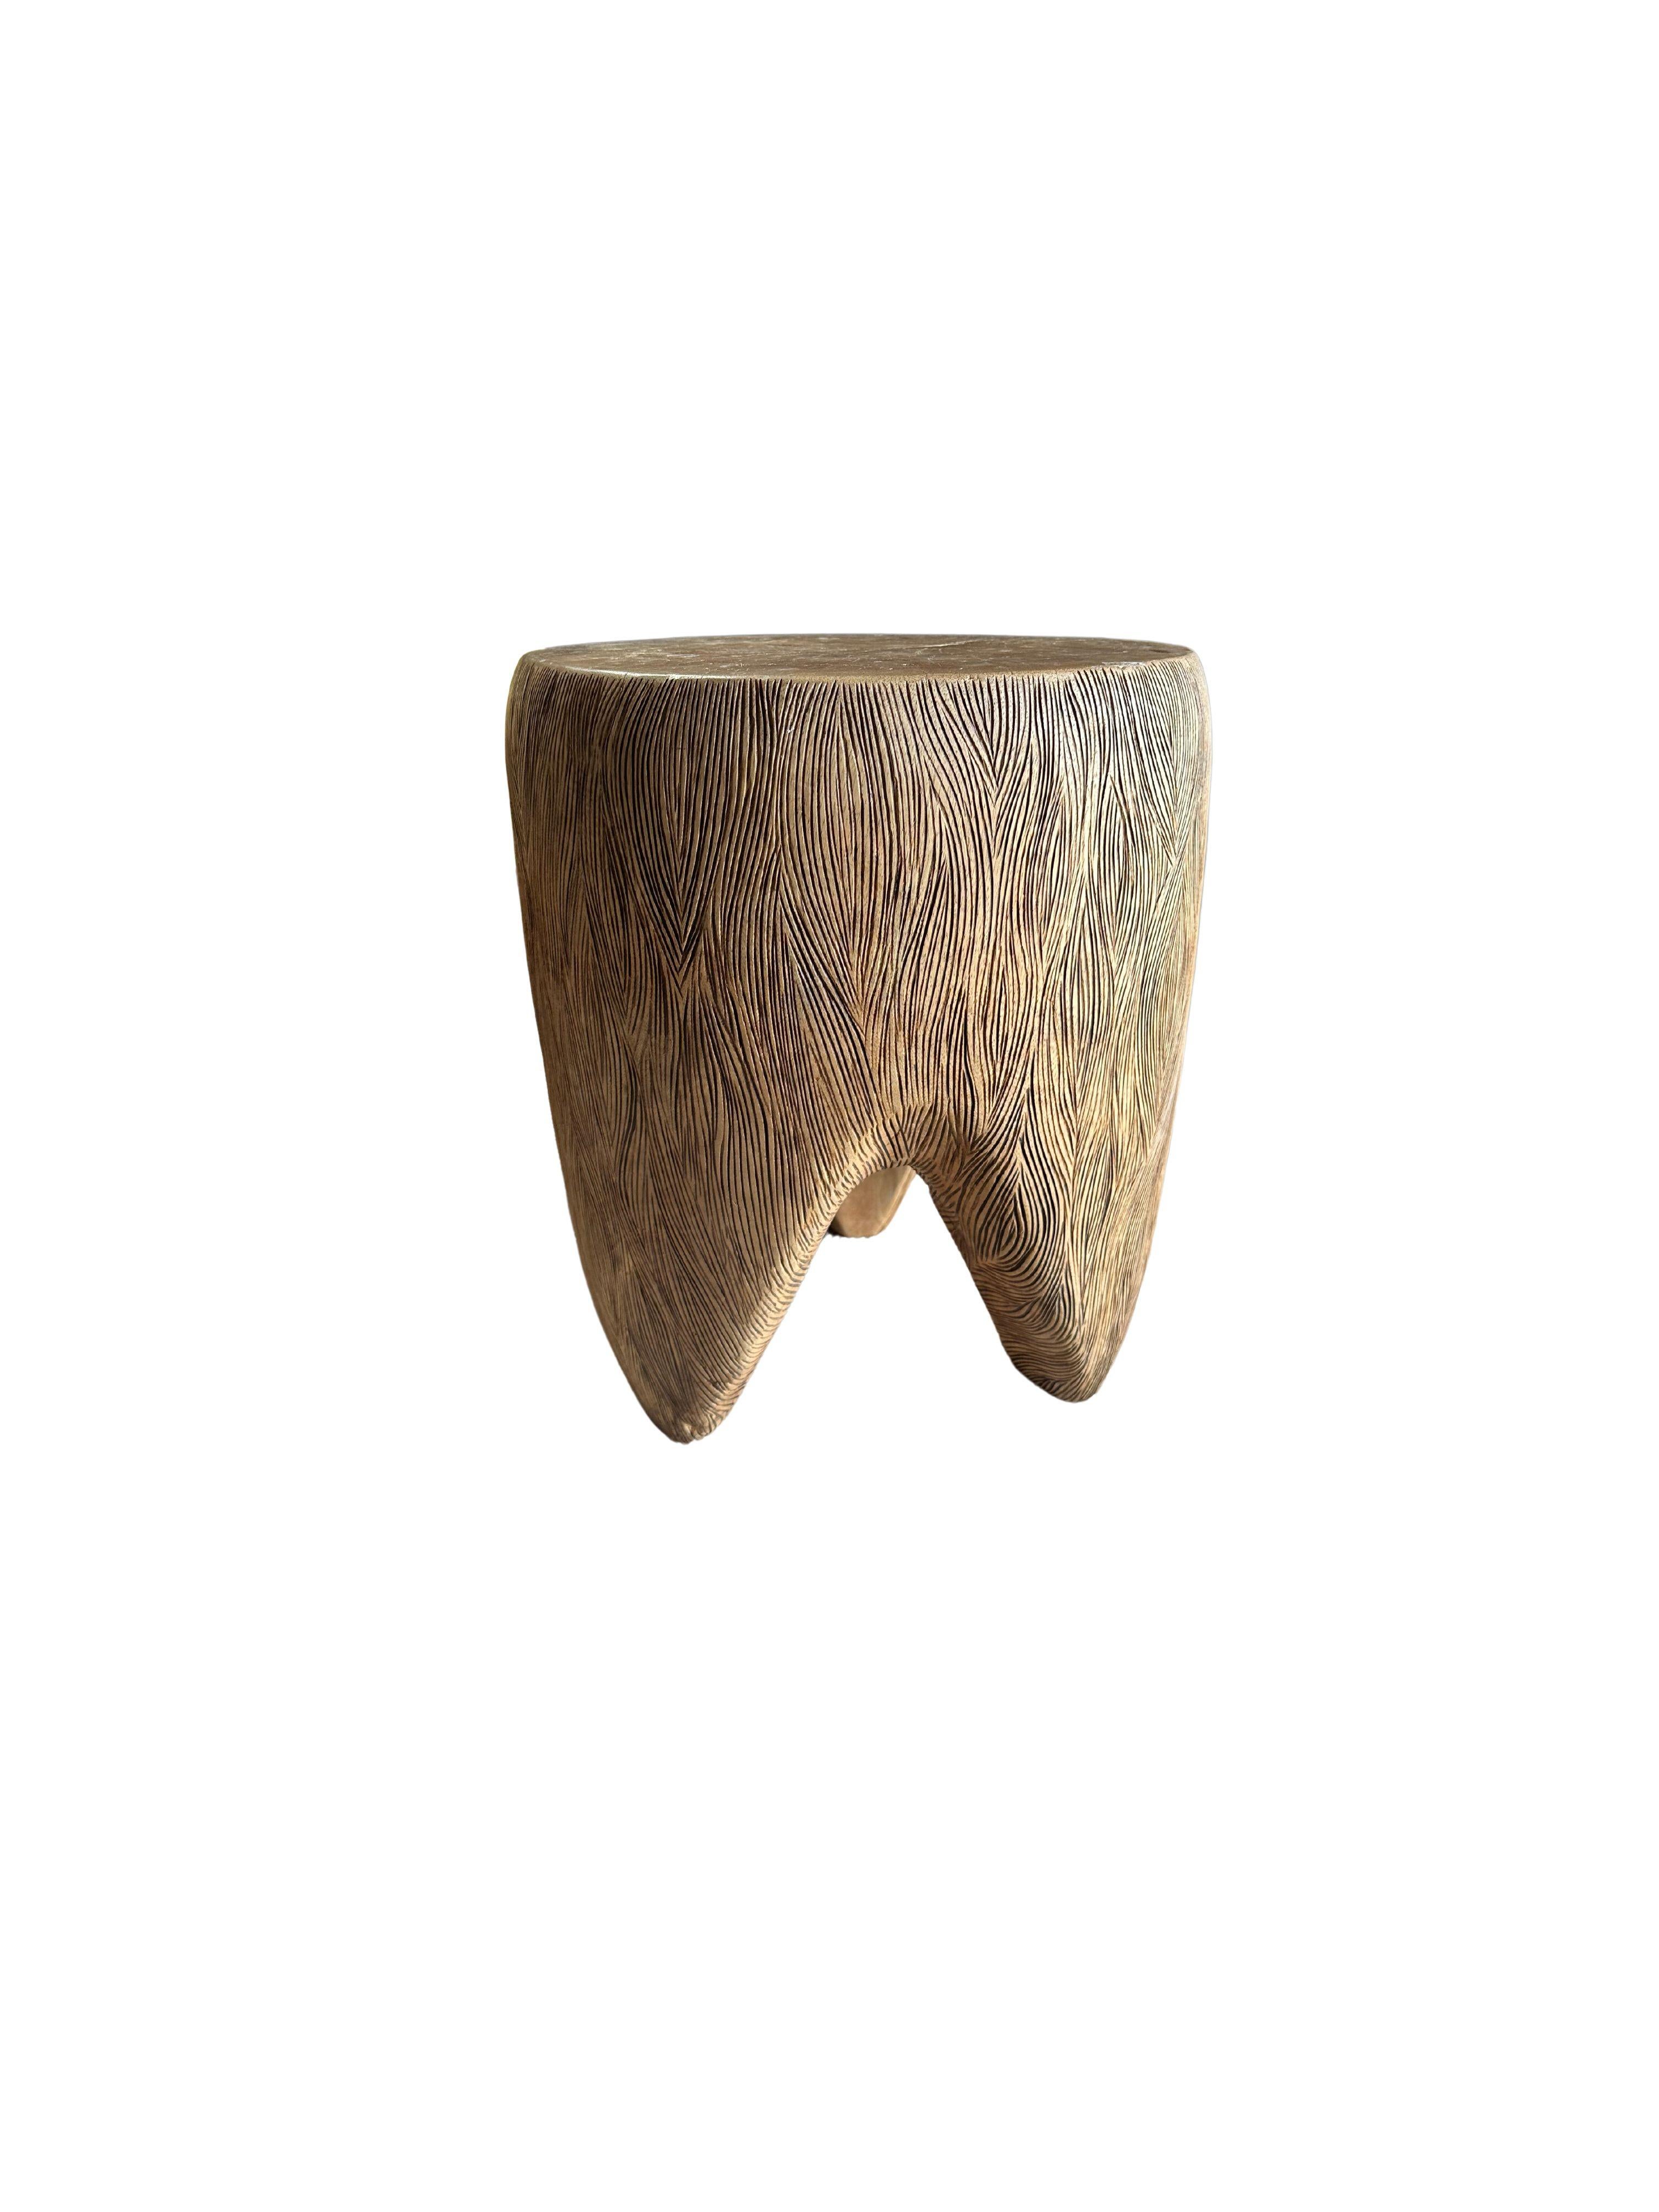 Indonesian Sculptural Mango Wood Side Table, Hand-Crafted Modern Organic For Sale